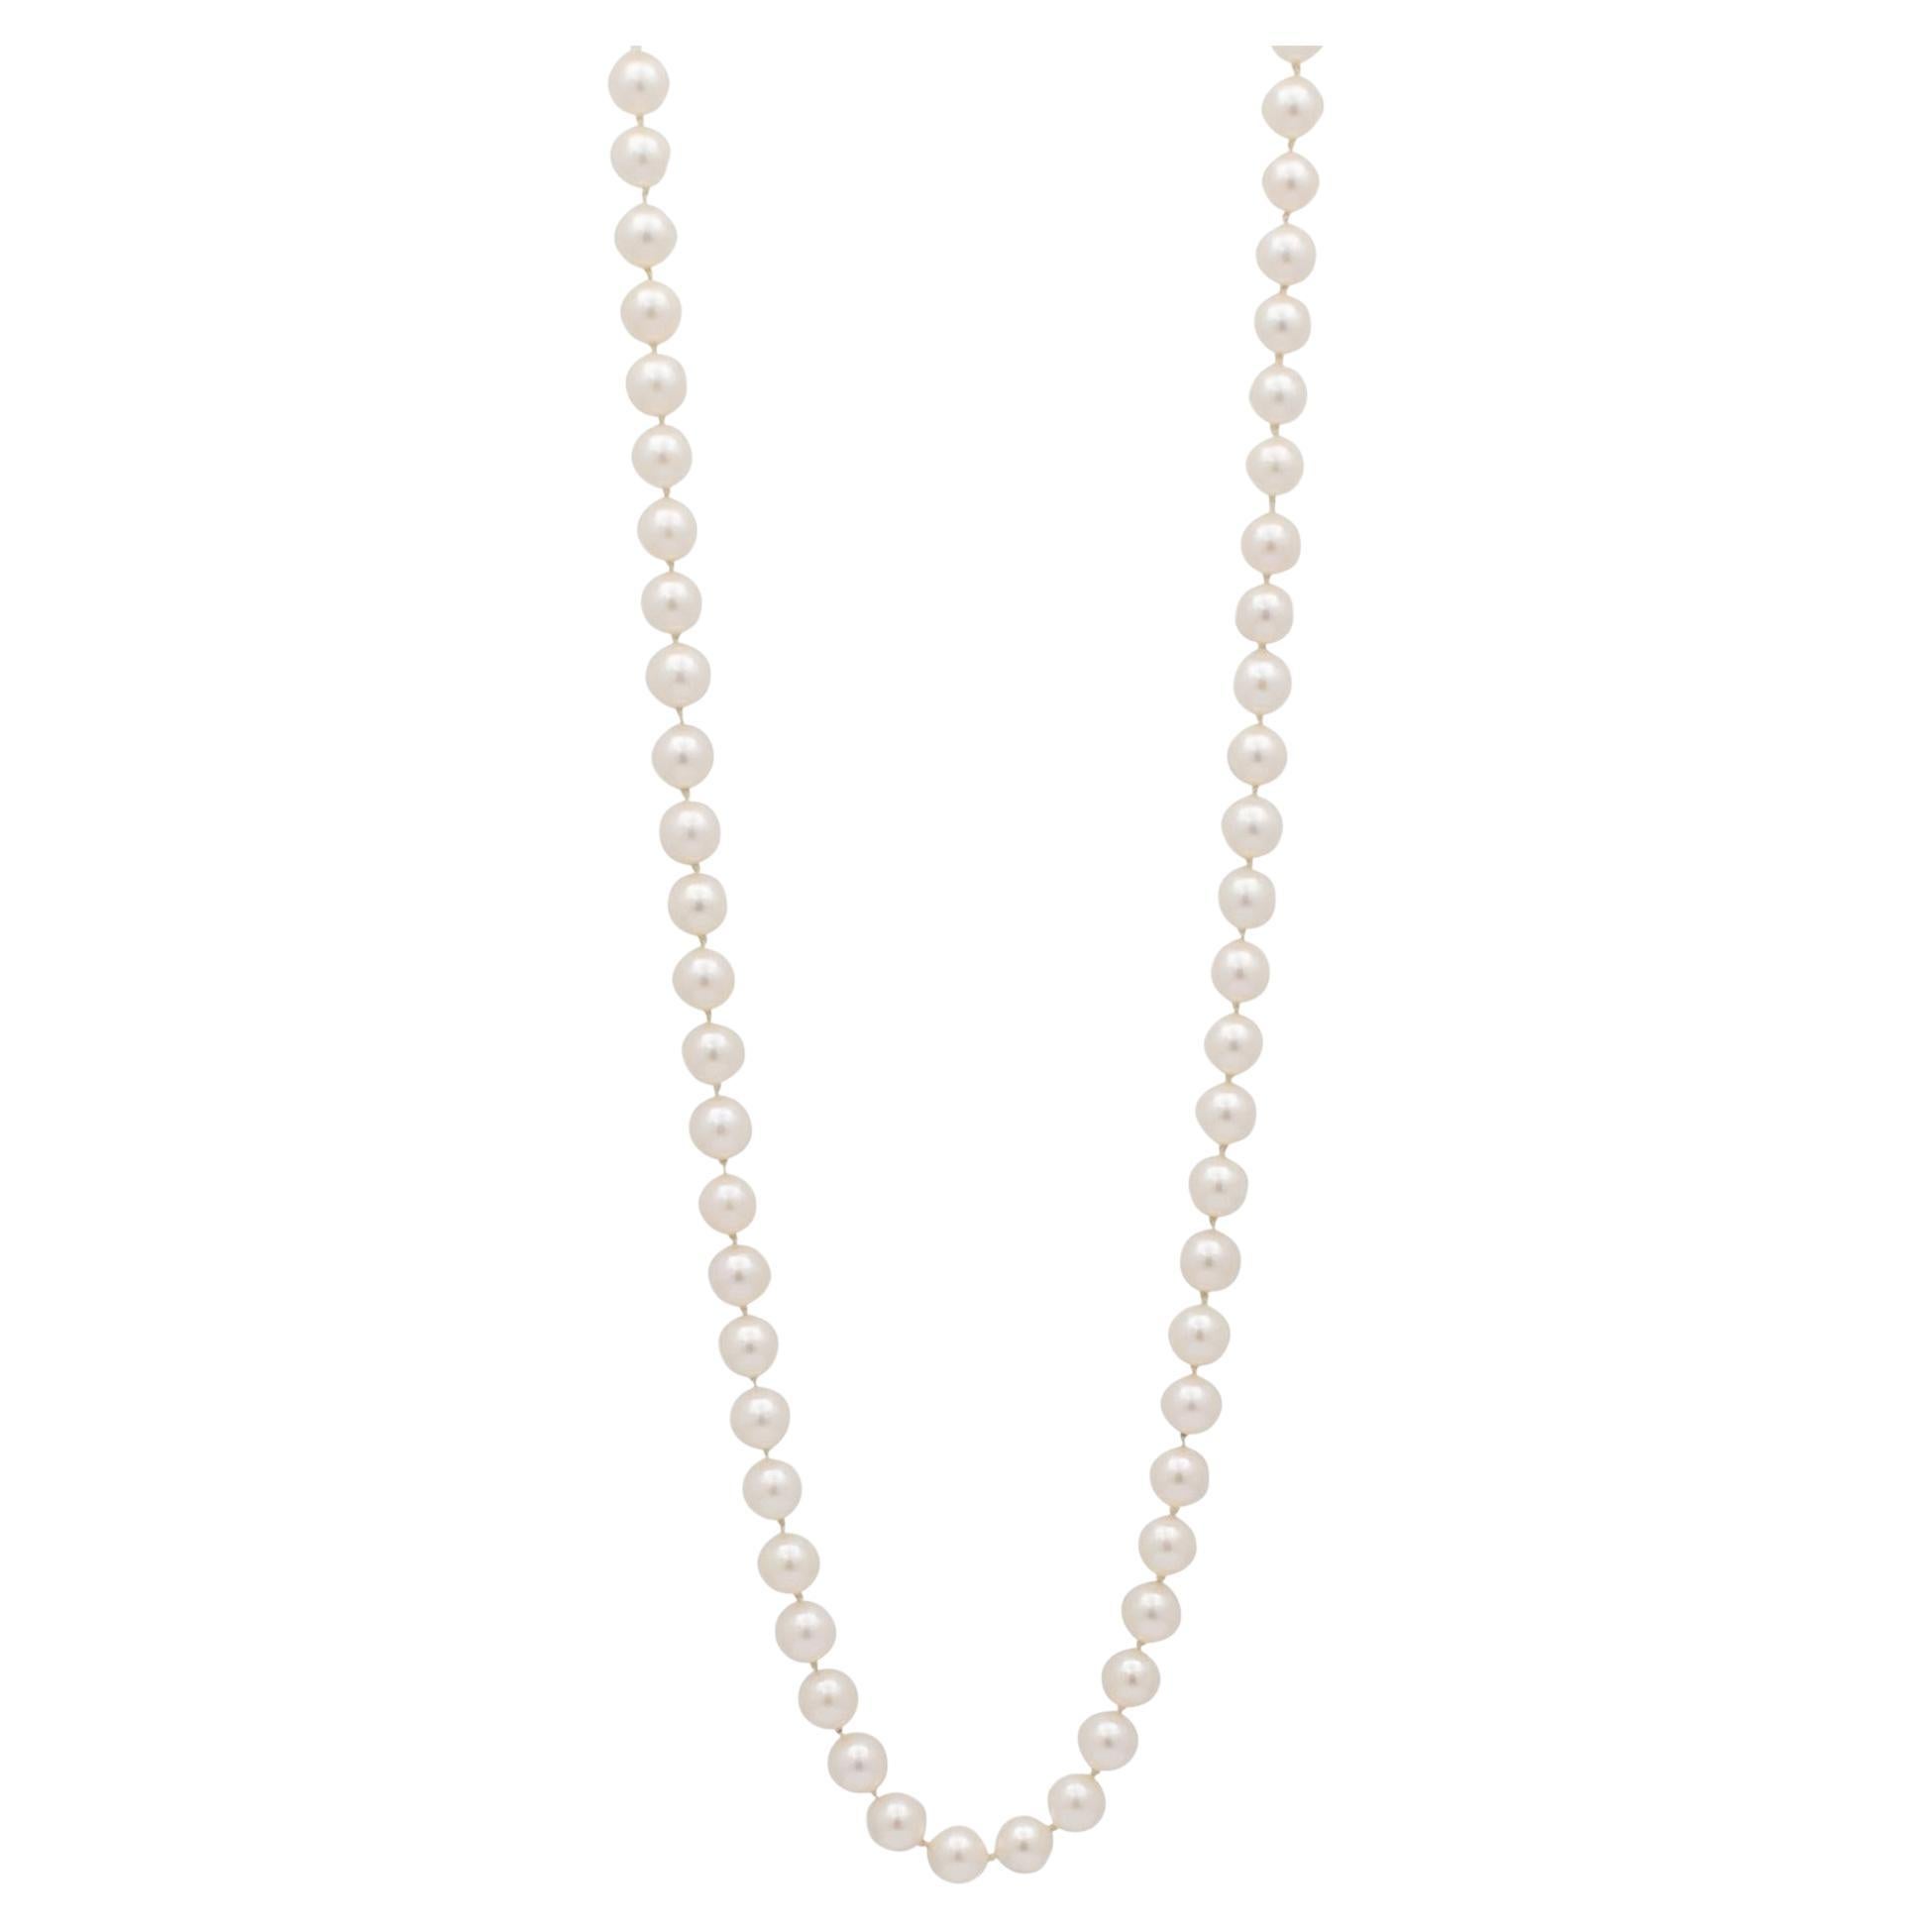 Mikimoto Akoya Cultured Pearl Strand Bead Chain Necklace - 18K Yellow Gold Clasp